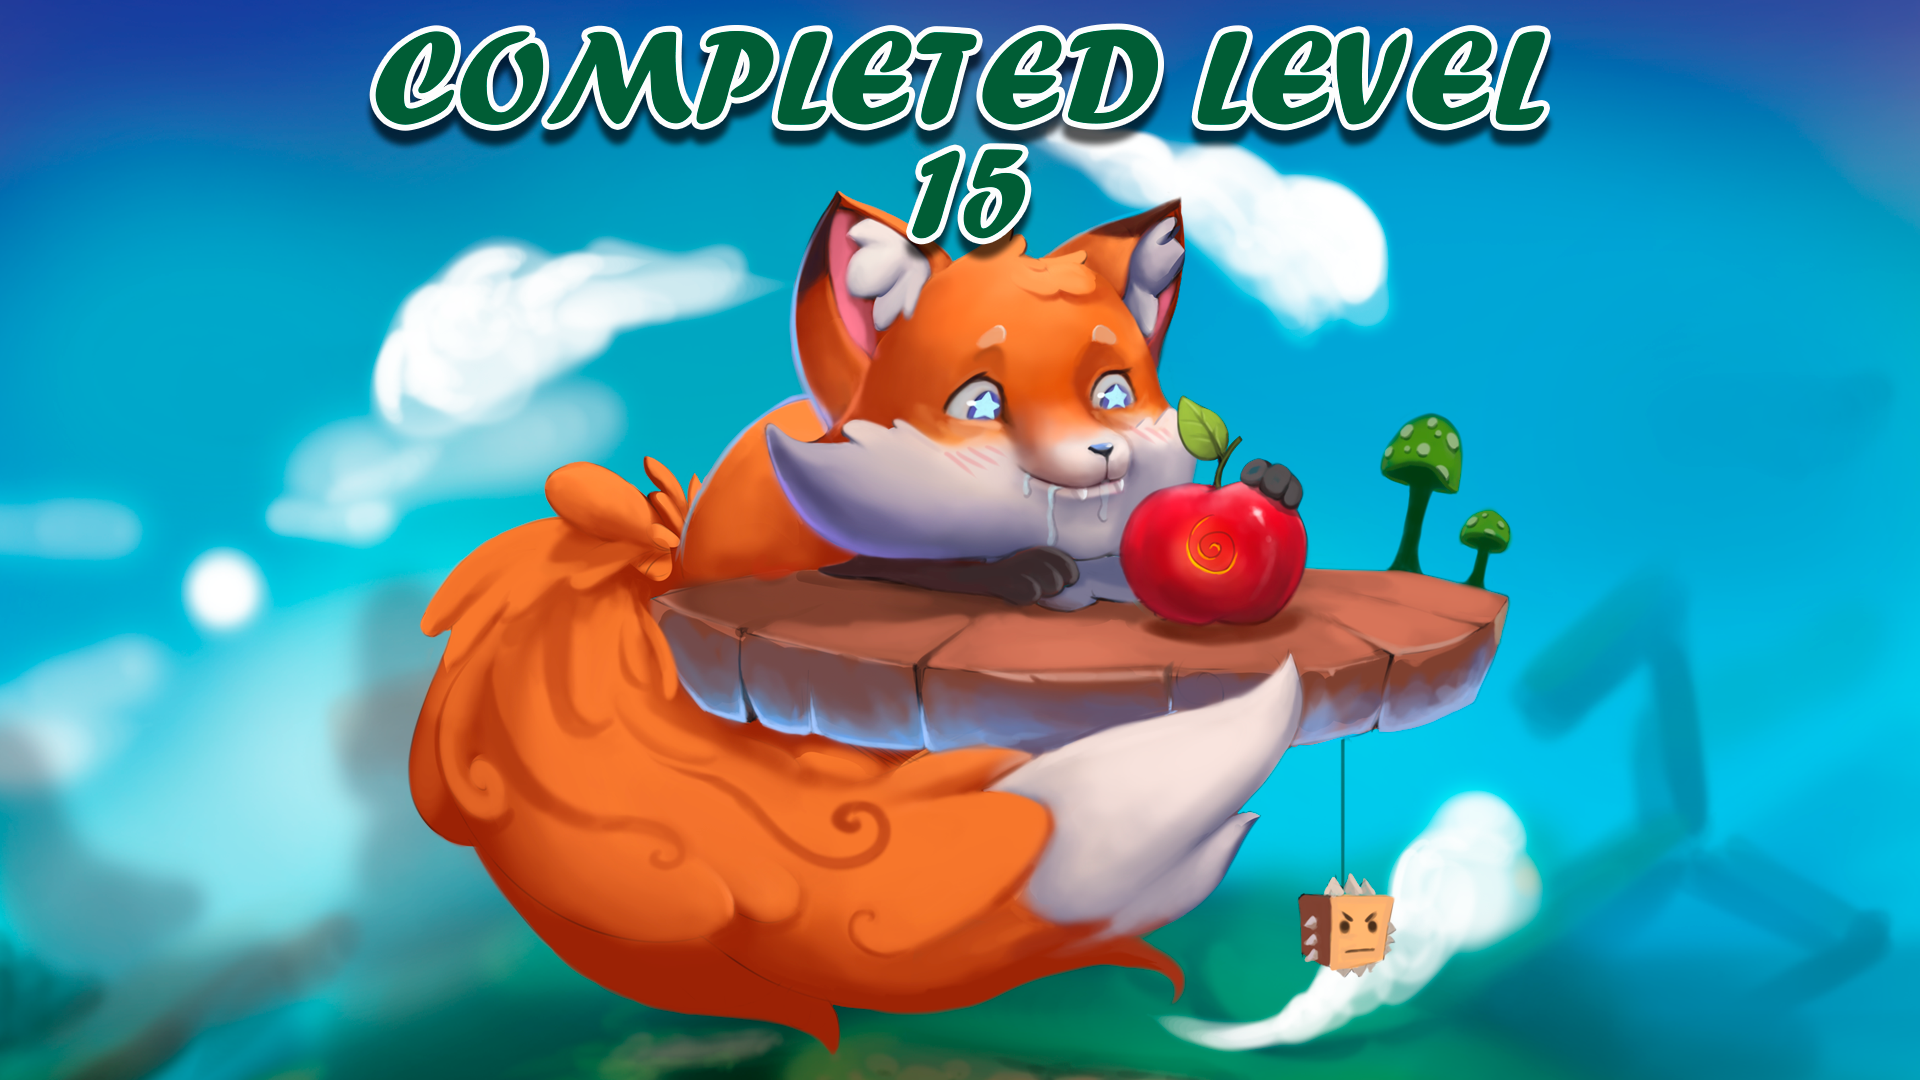 15 levels completed